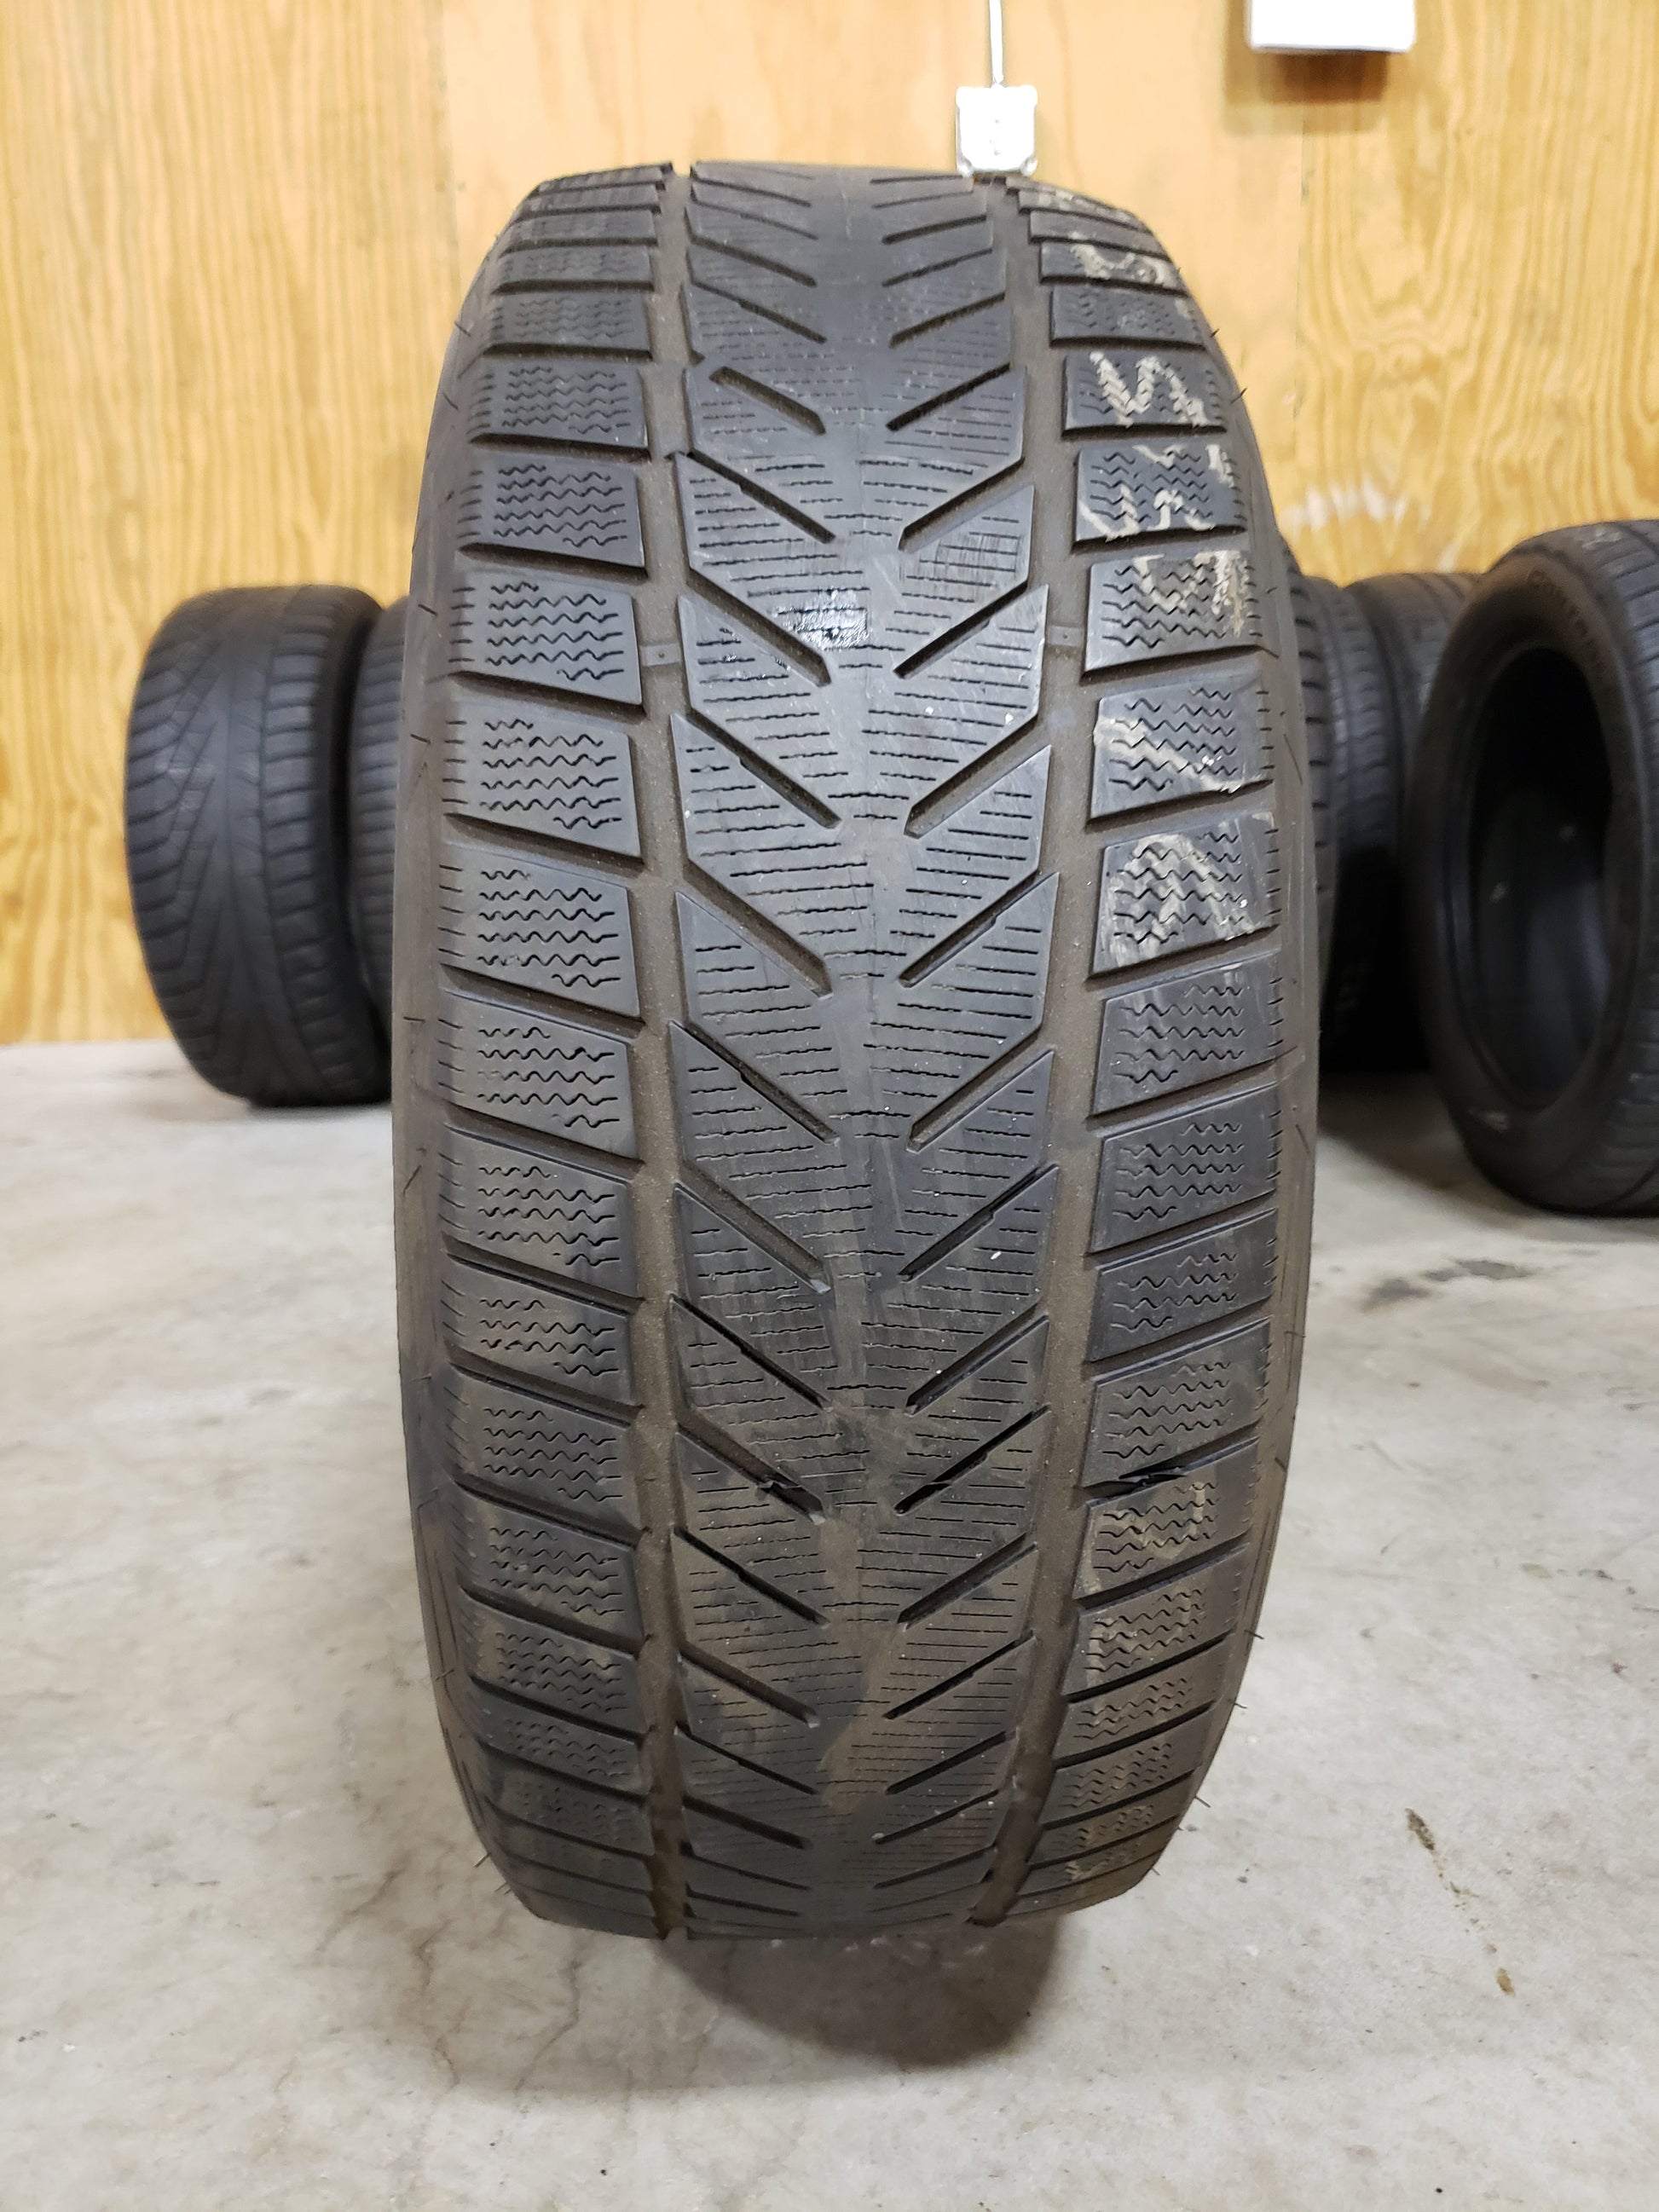 SINGLE 225/55R16 Vredestein Winter Xtreme Z 99H XL Extra Load - Used Tires